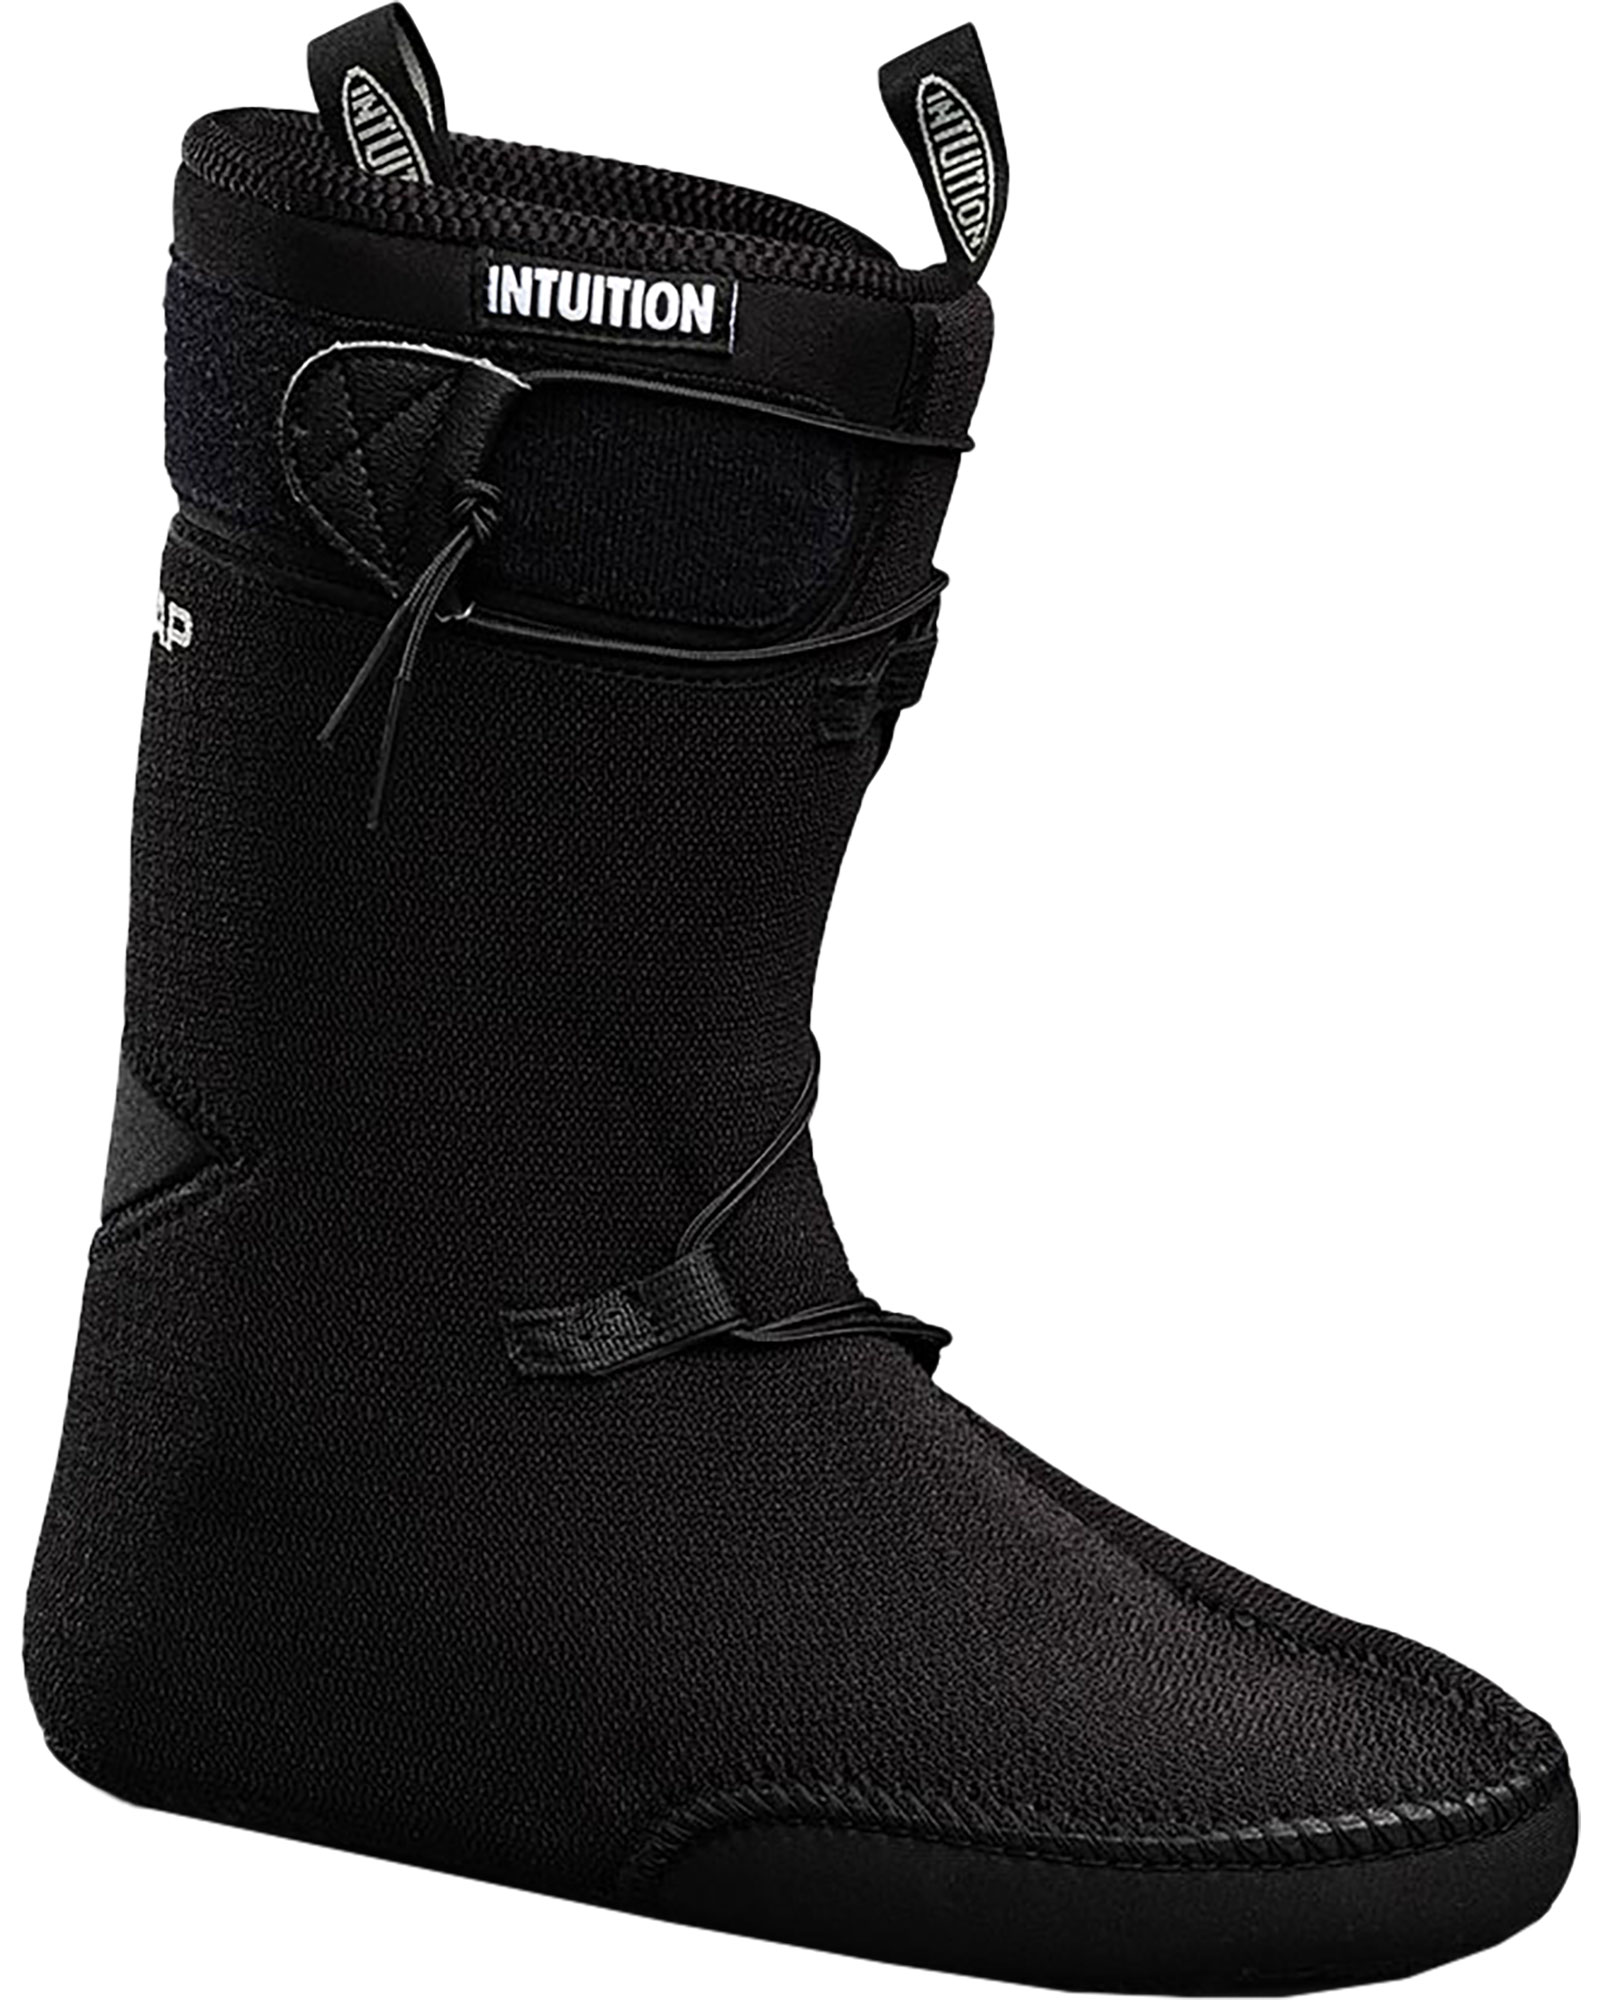 Intuition Tour Wrap Boot Liners MP 28.0